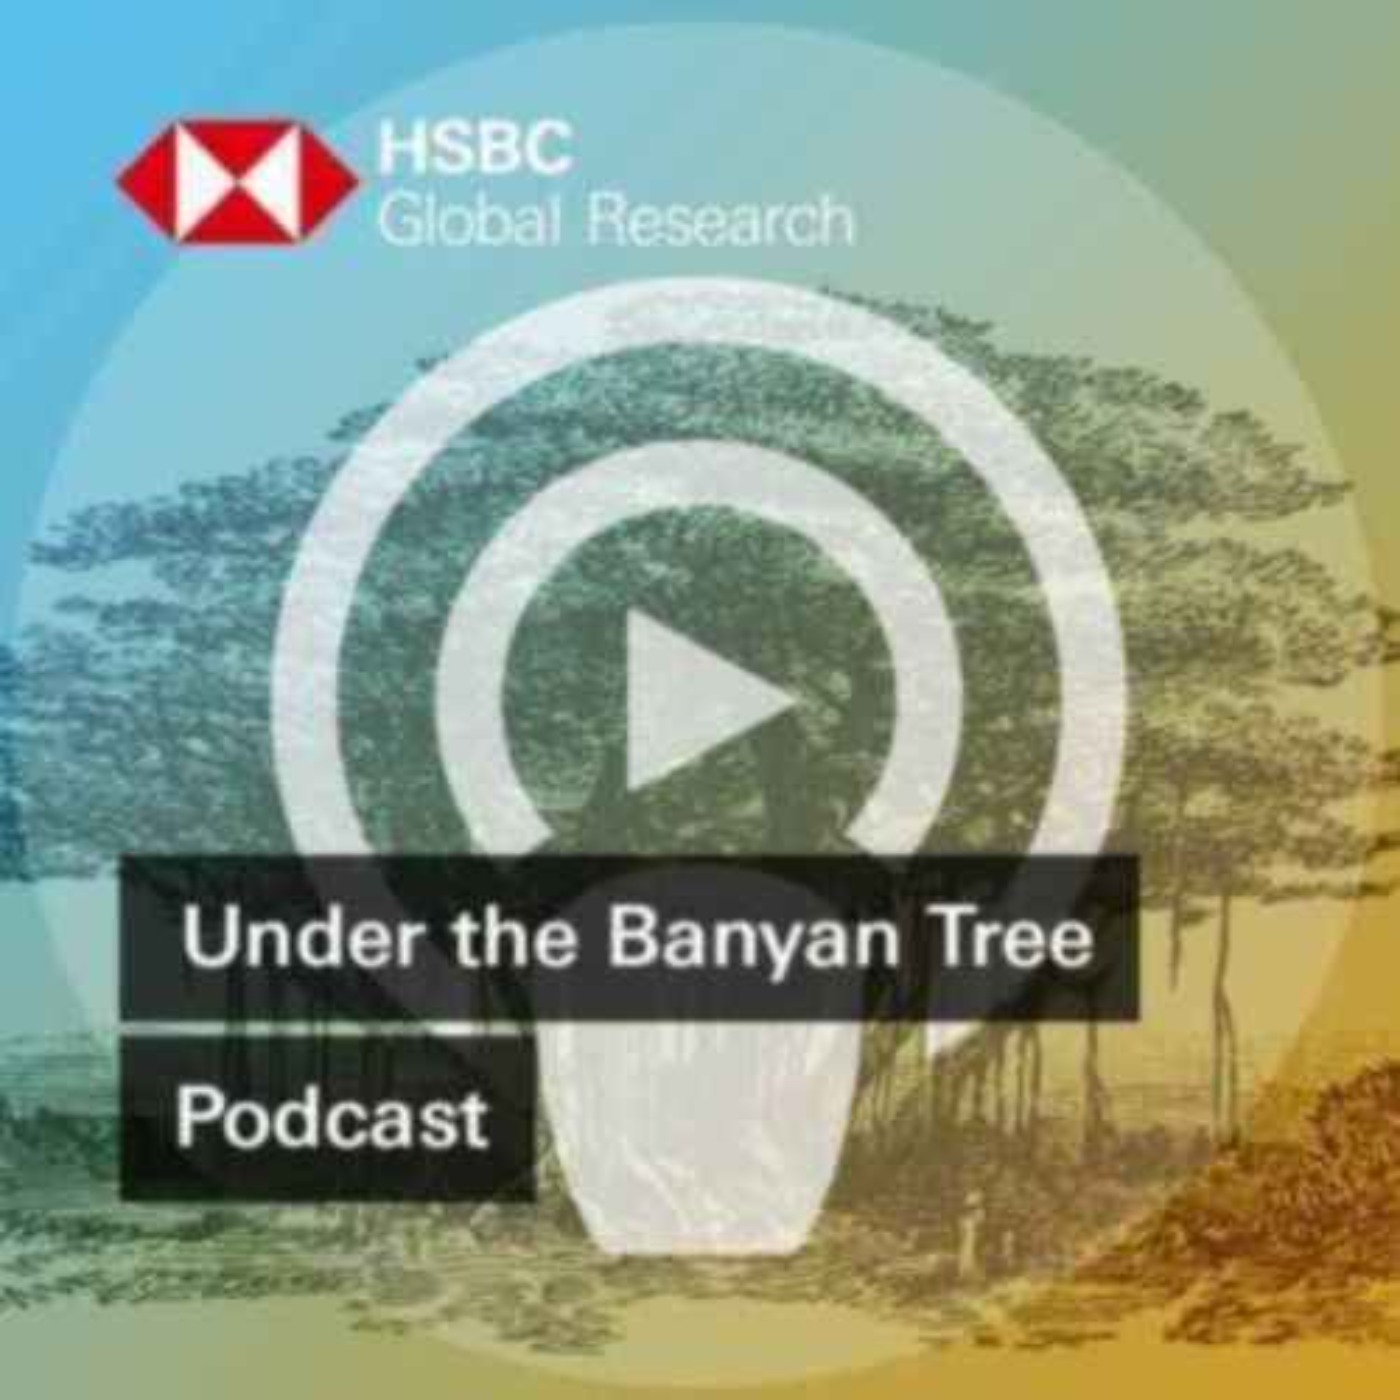 Under the Banyan Tree - How are global investors feeling about China?